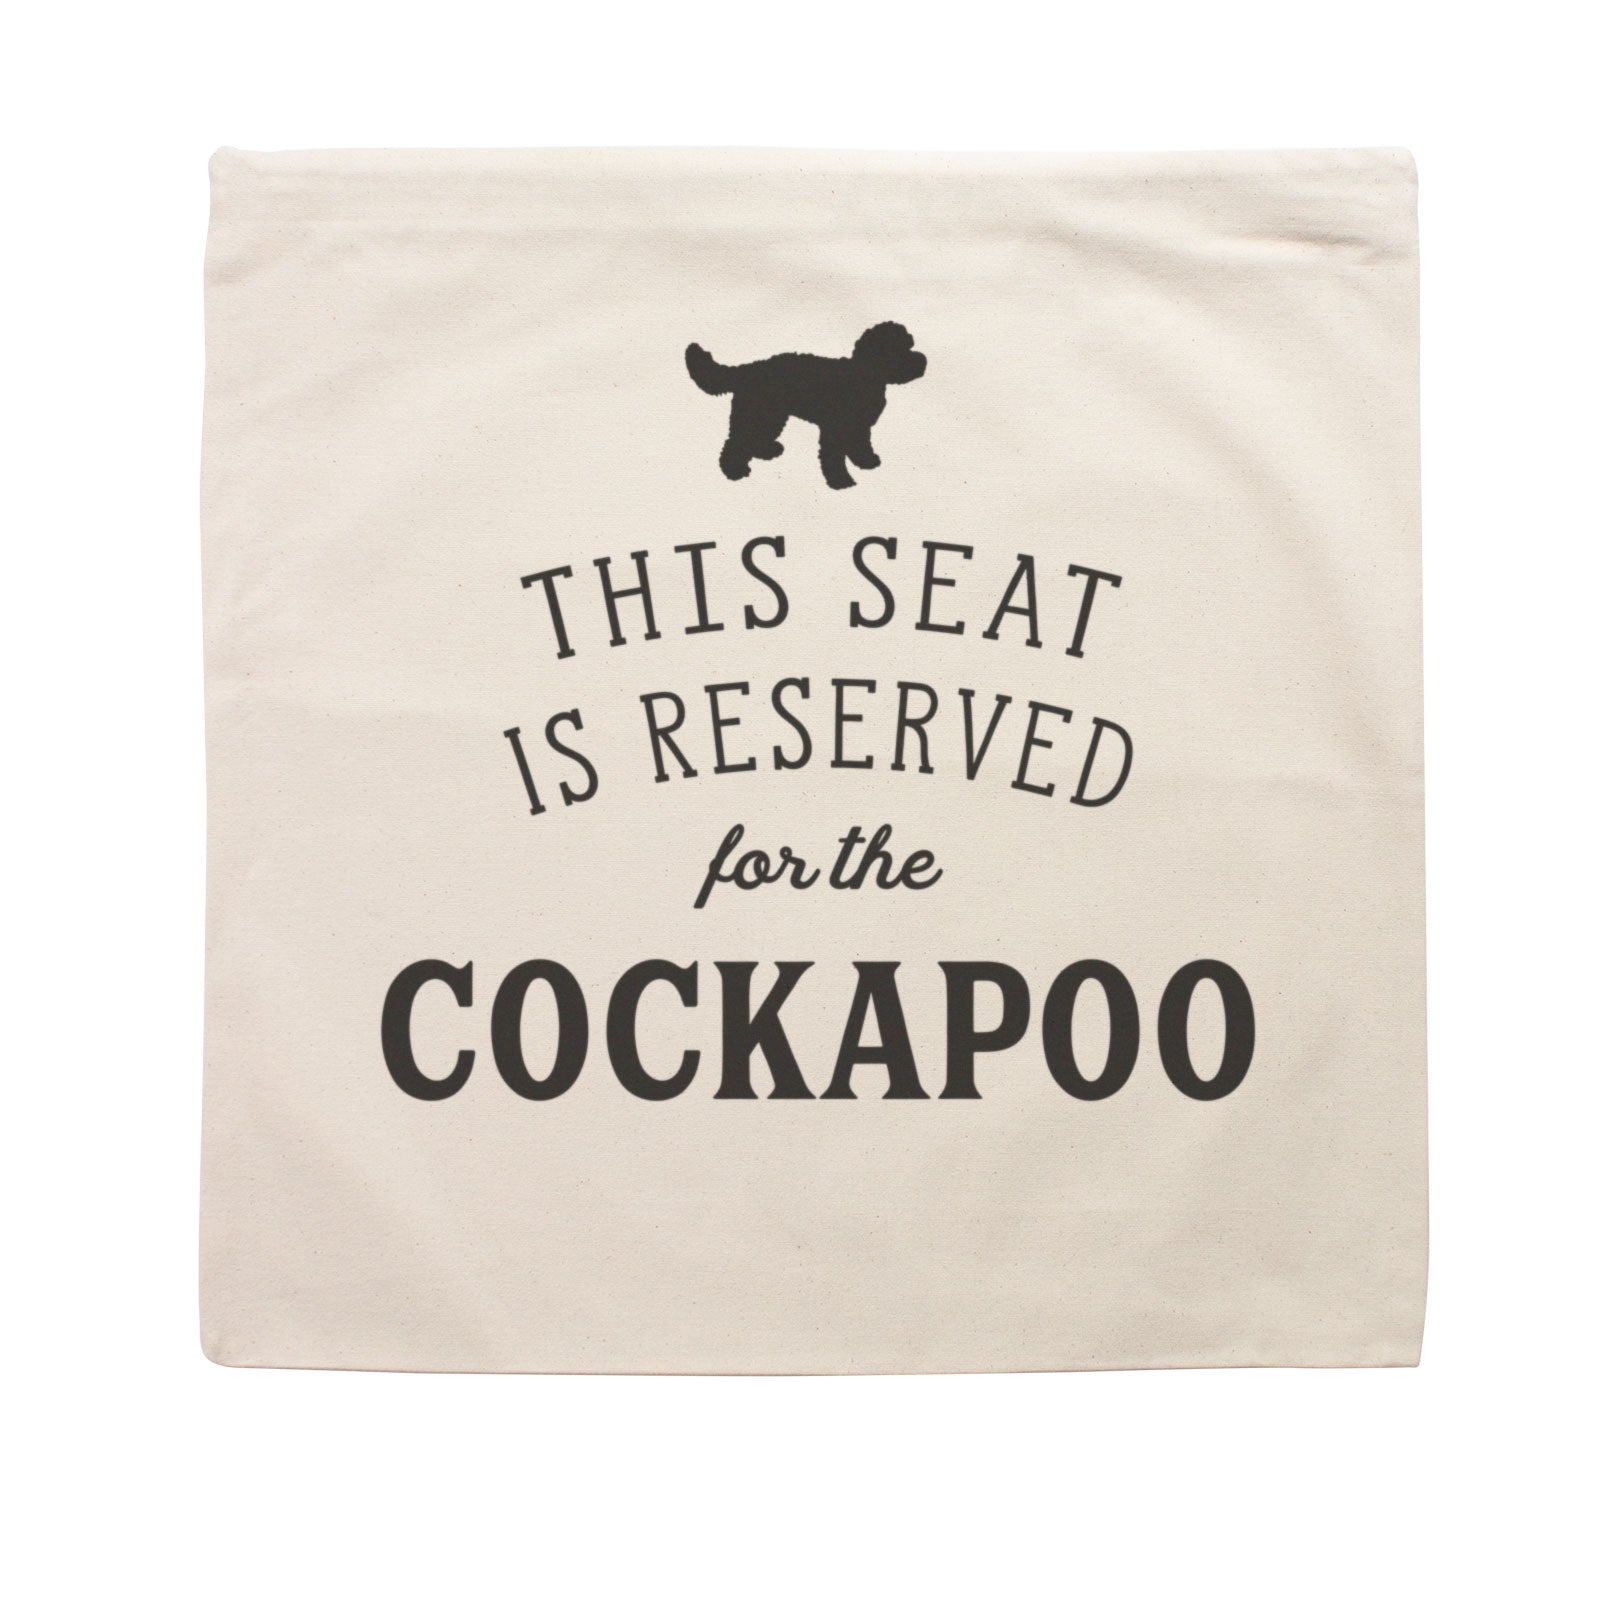 Reserved for the Cockapoo Cushion Cover